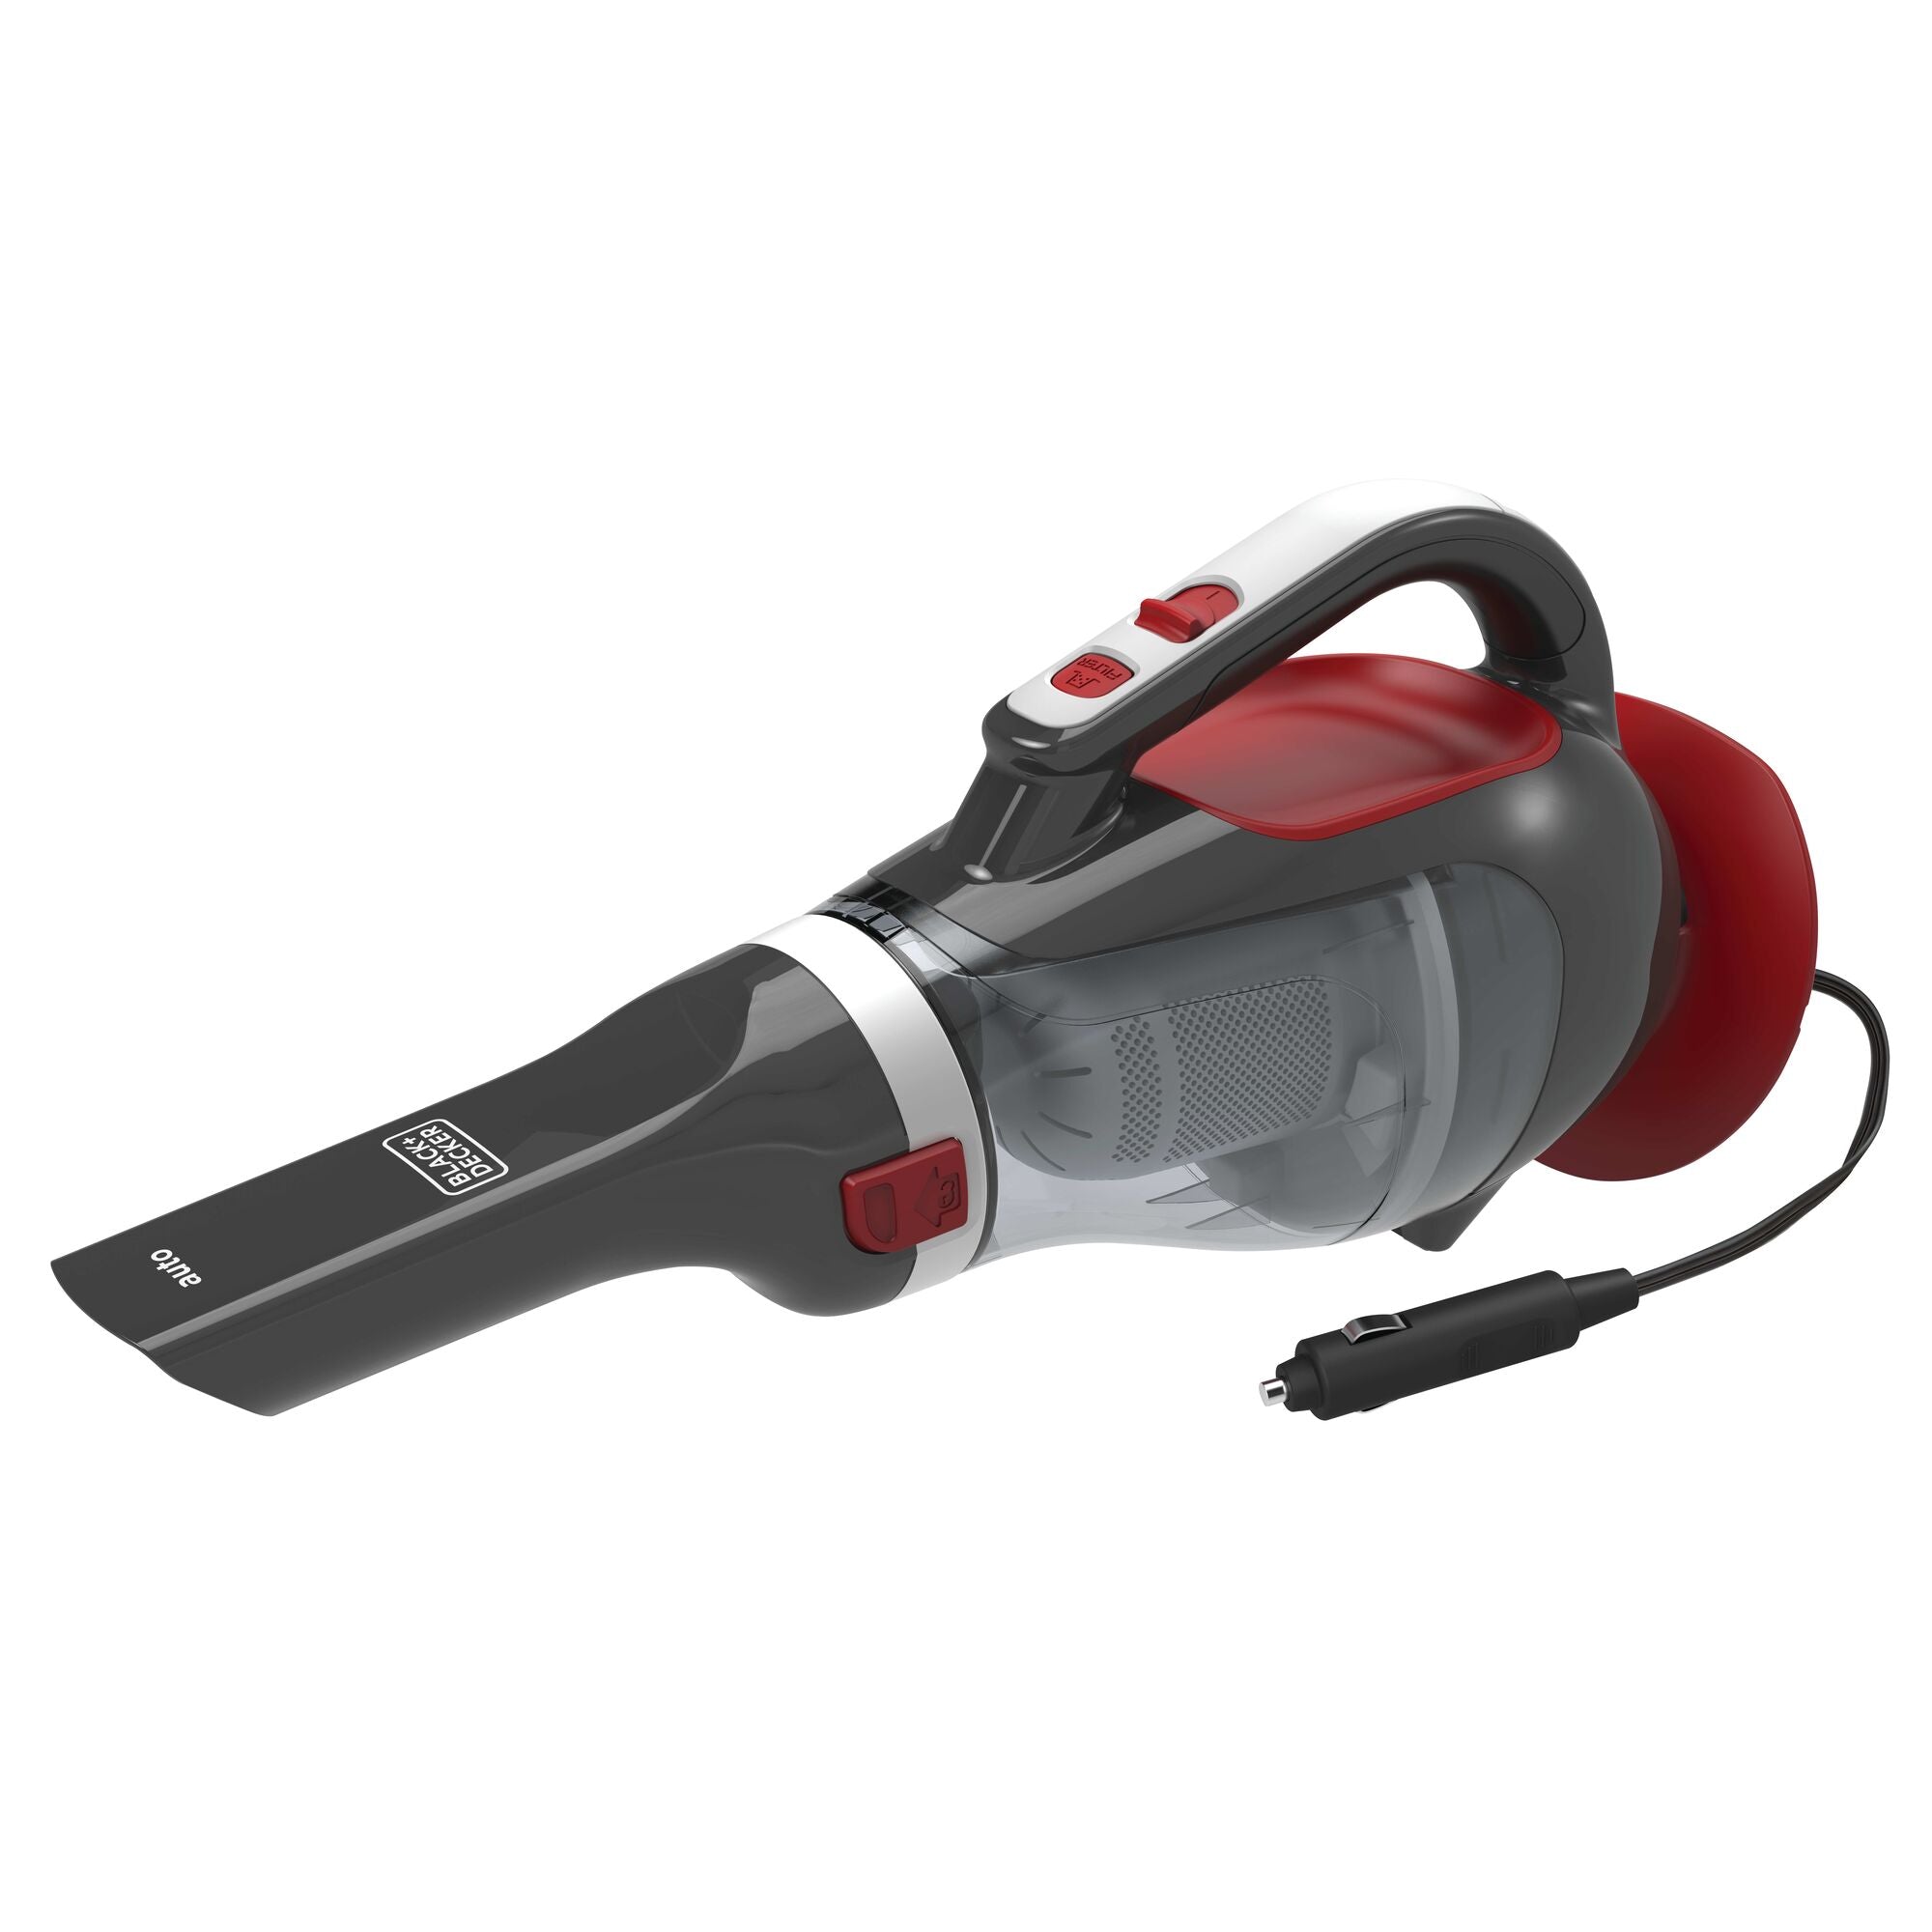 Image of dustbuster 12V MAX* DC Car Handheld Vacuum, Red